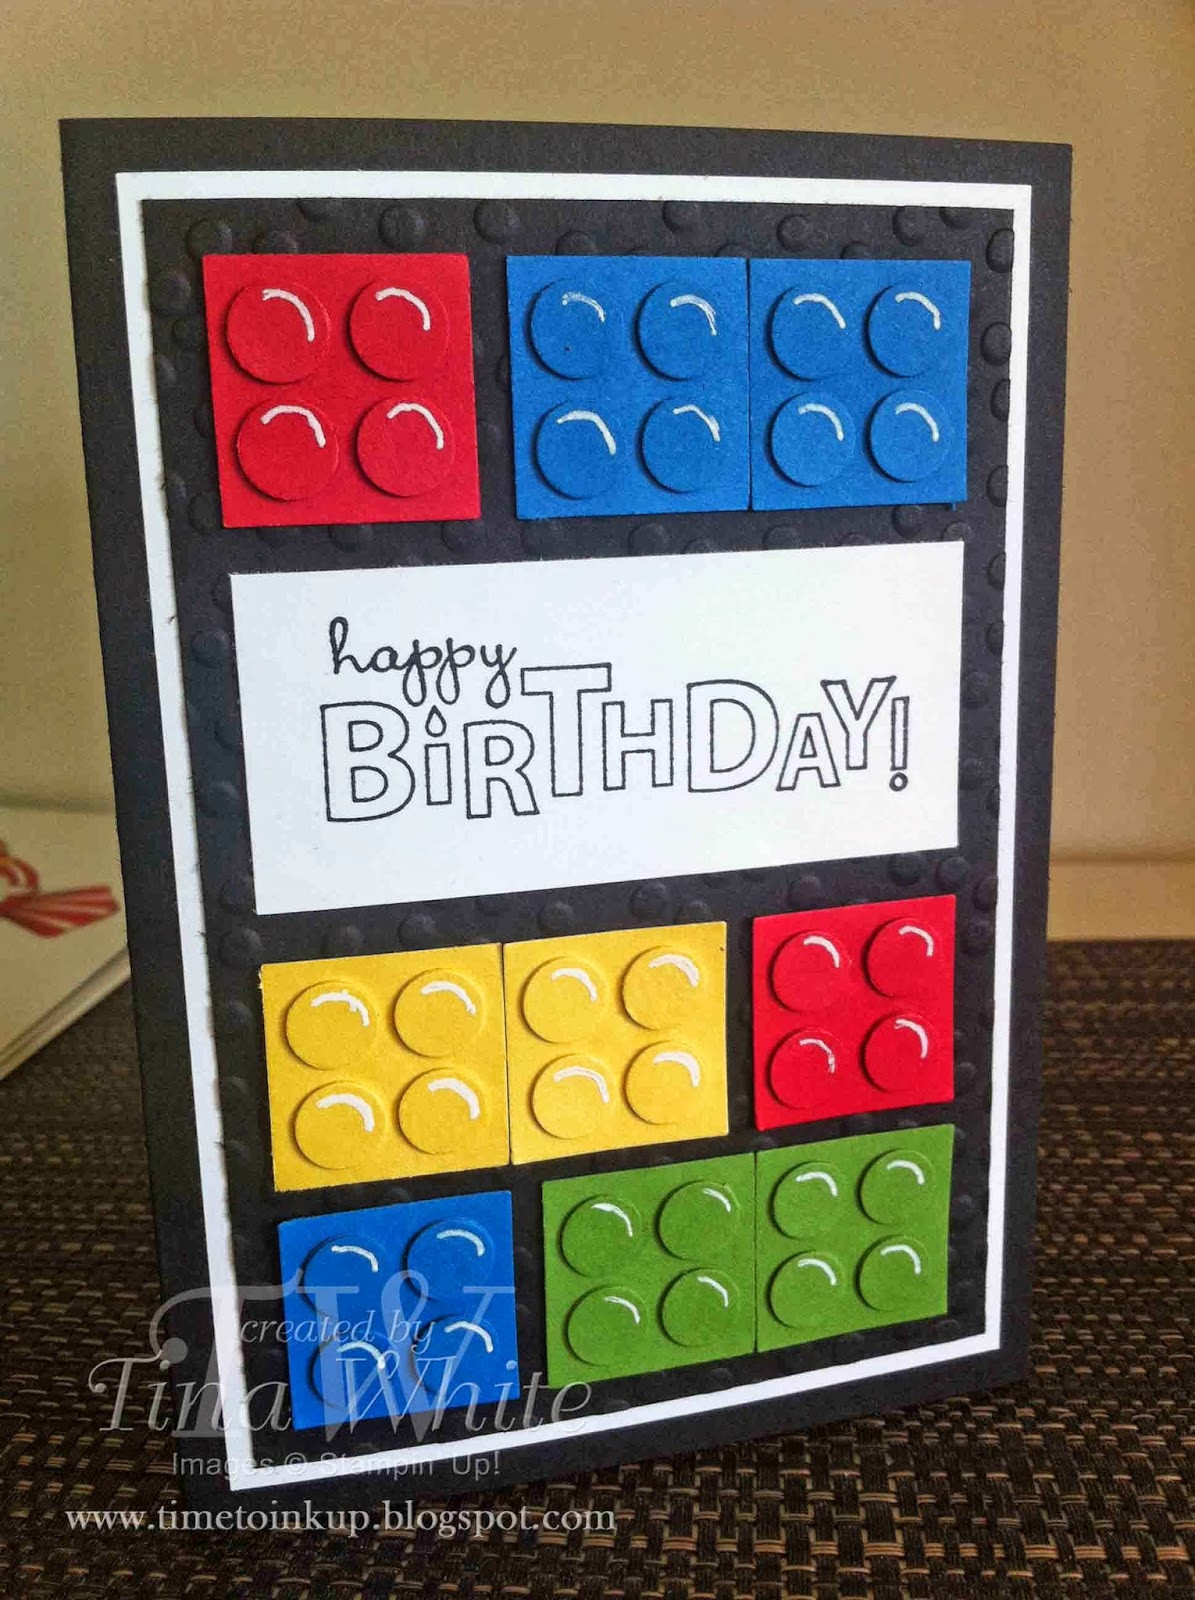 Lego Birthday Card
 Stampin Up Australia Tina White Time to Ink Up